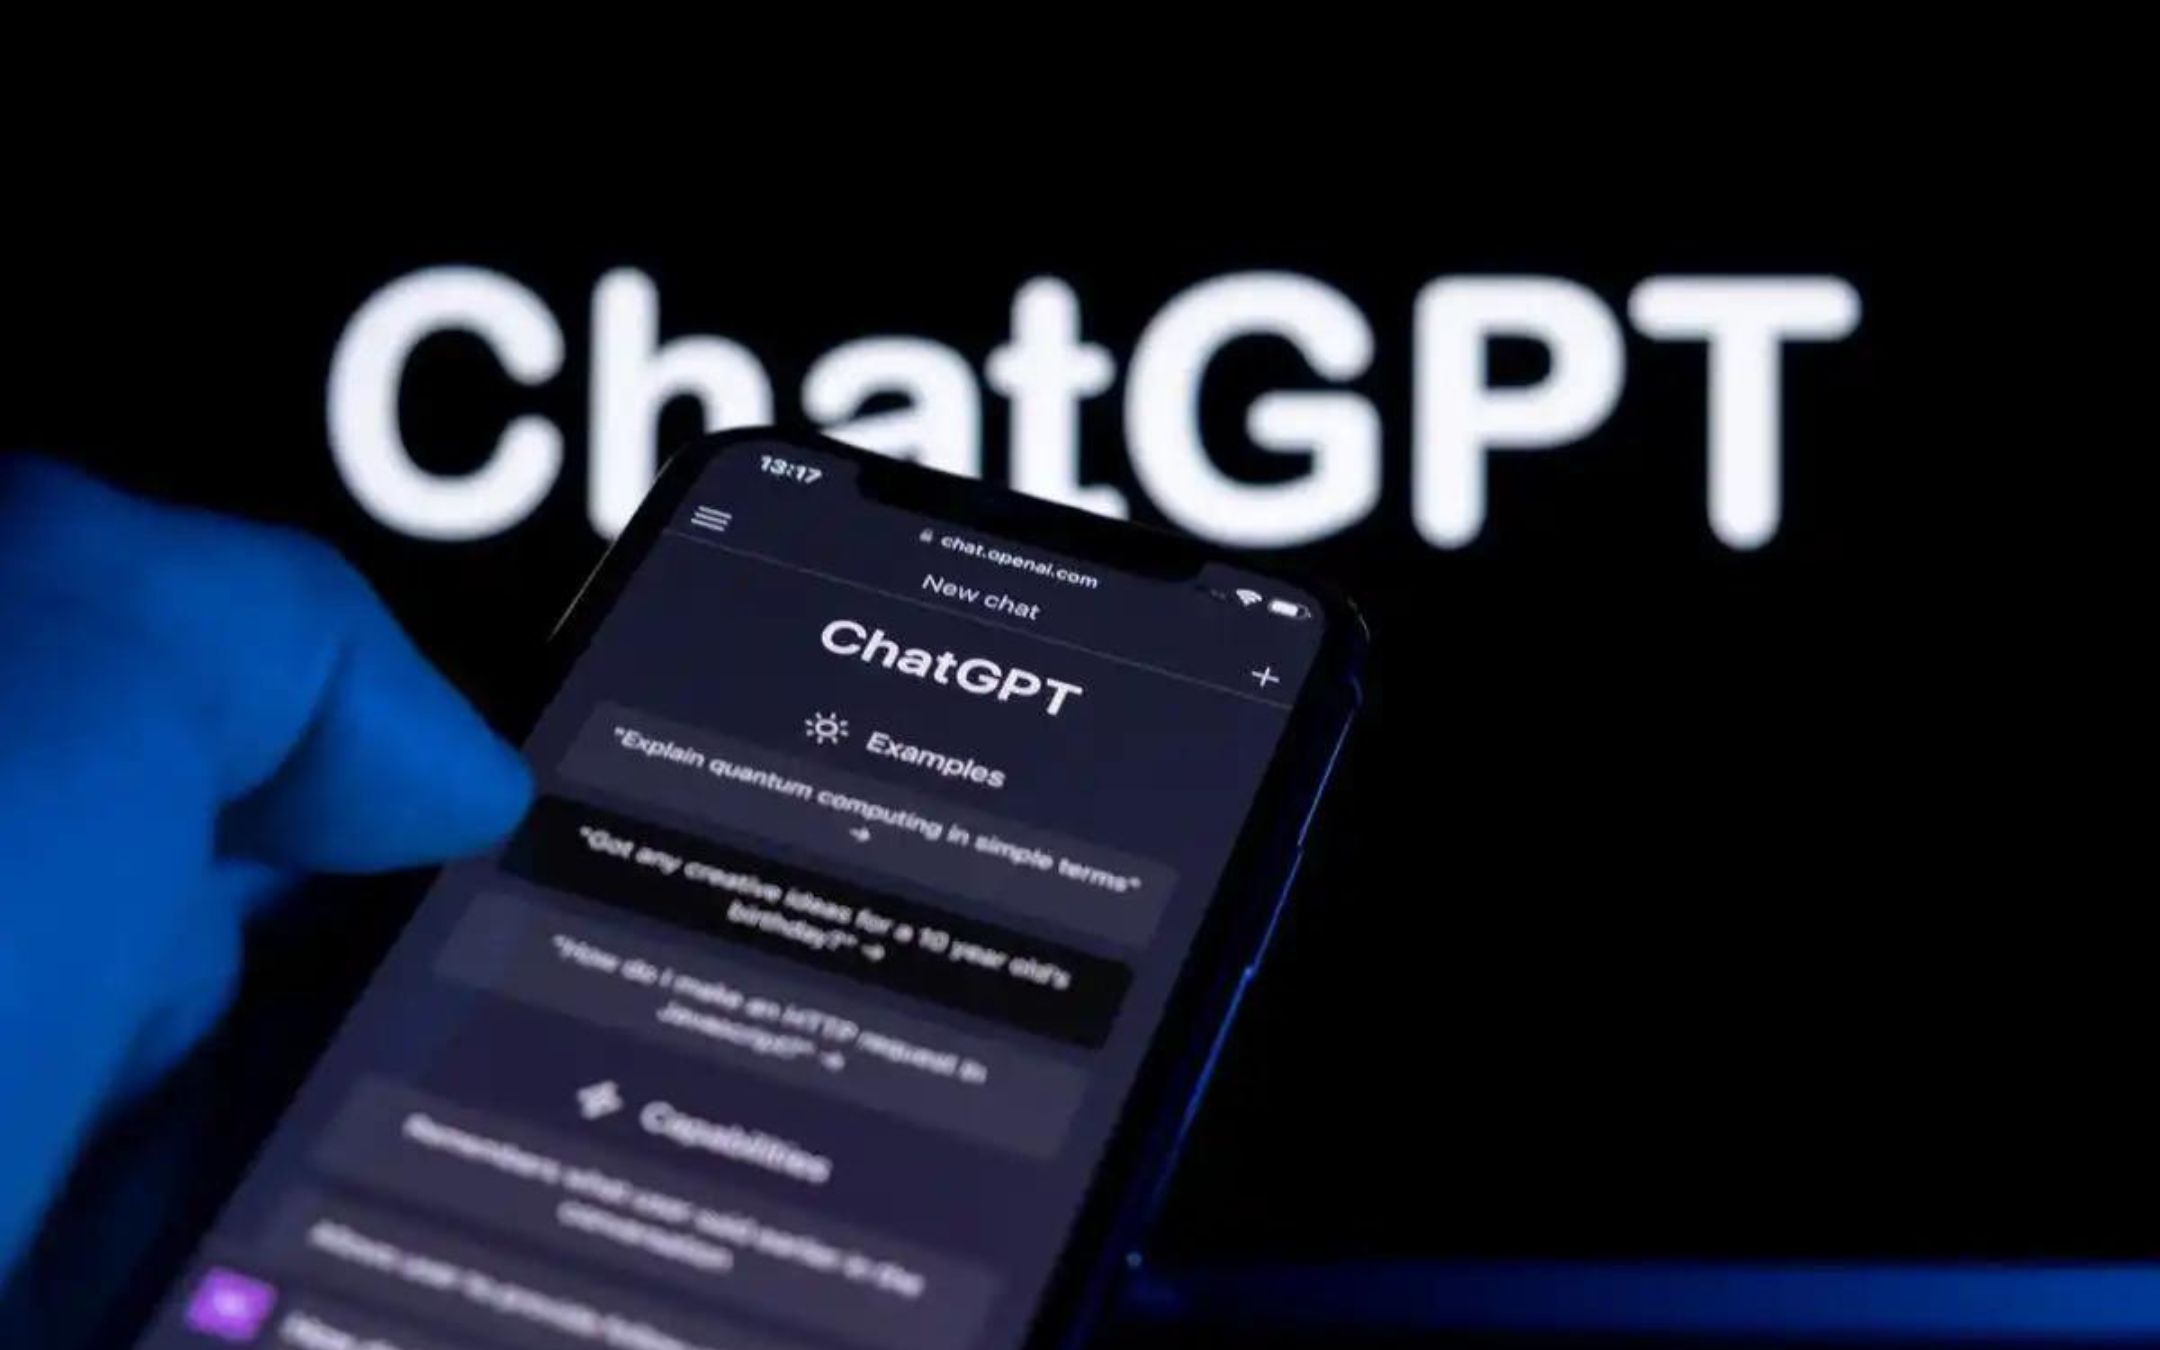 ChatGPT integrated on a smartphone for the first time